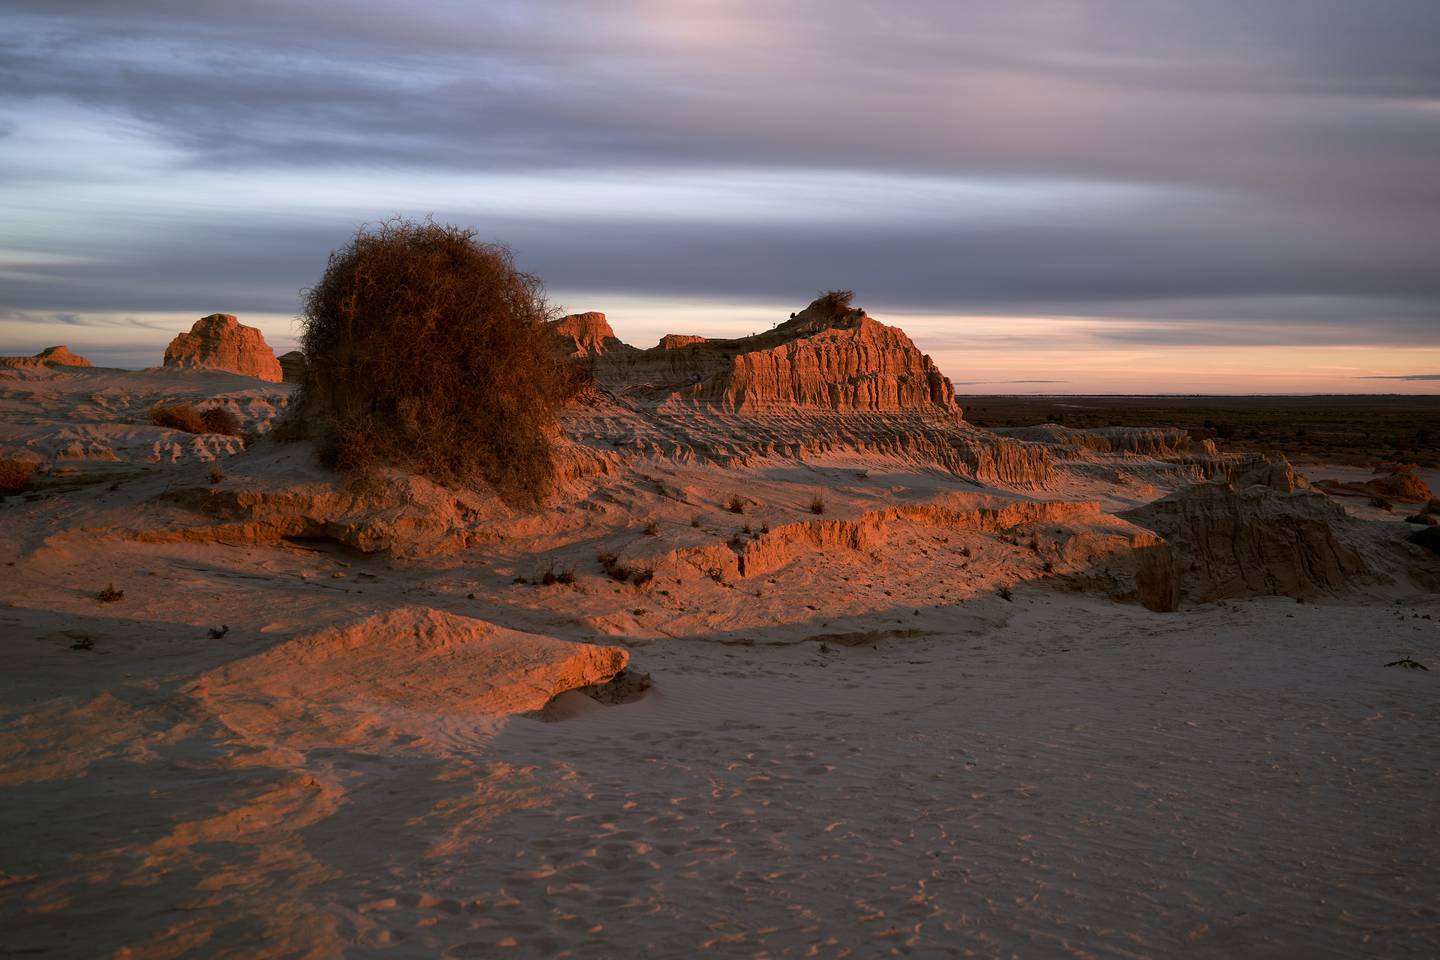 Mungo National Park in New South Wales. After battling tough Covid-19 restrictions, Australia's tourism has reopened with a promise to do better. Photo: Unsplash / Gilberto Olimpio